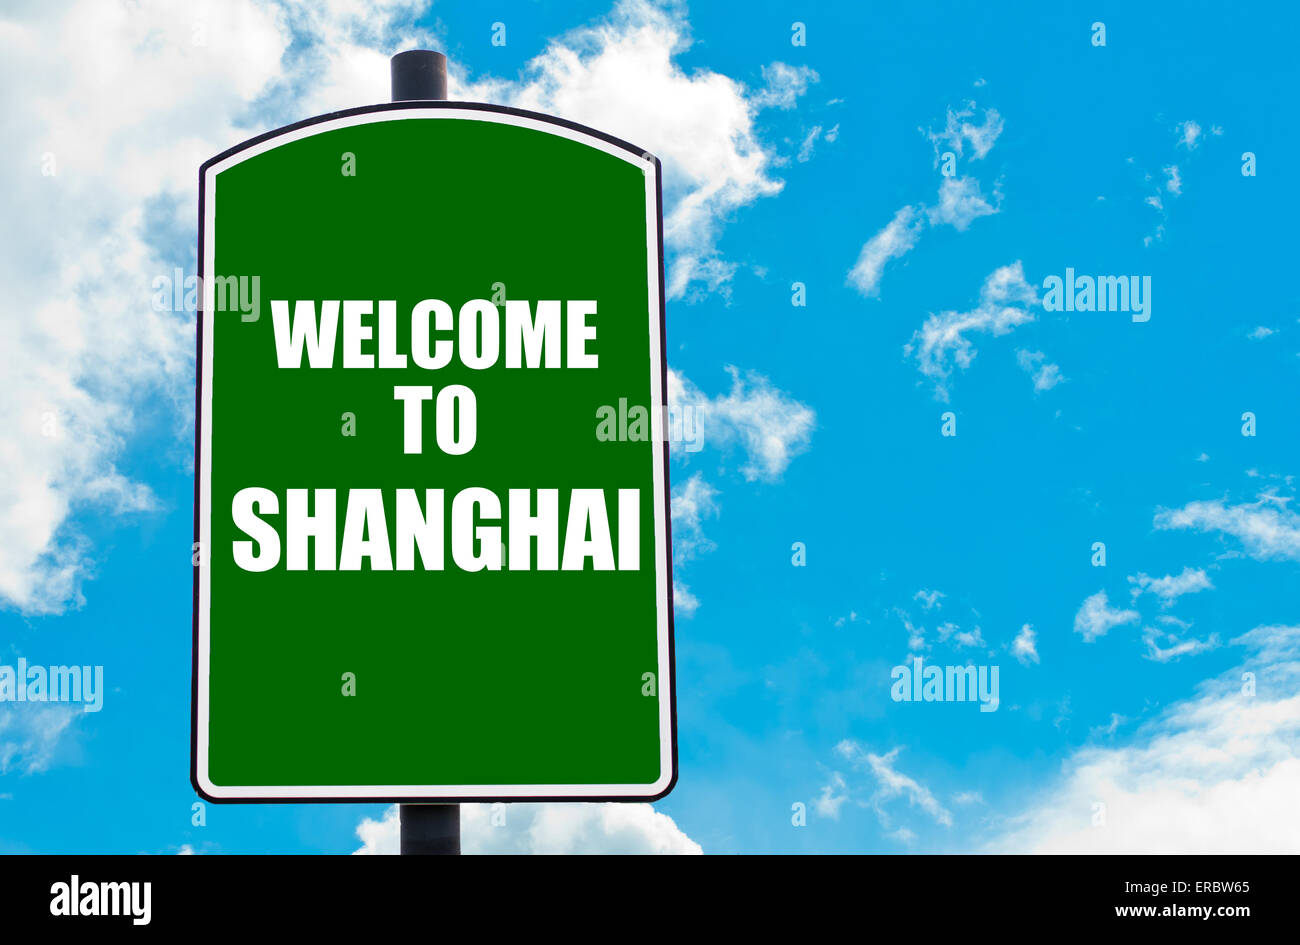 Green road sign with greeting message WELCOME TO SHANGHAI, CHINA isolated over clear blue sky background Stock Photo